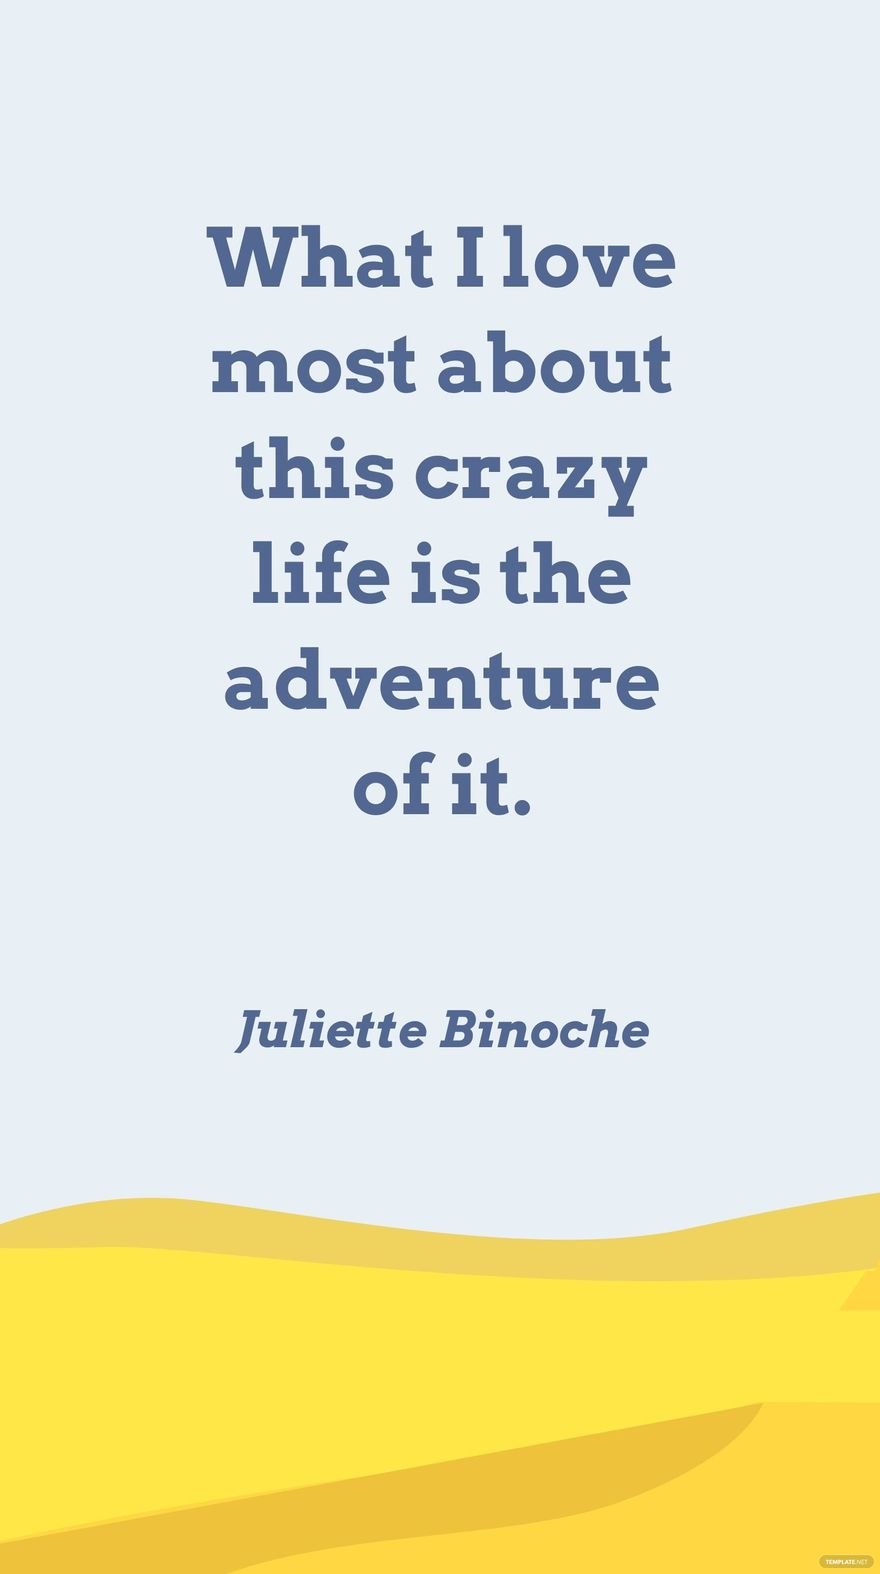 Free Juliette Binoche - What I love most about this crazy life is the adventure of it.